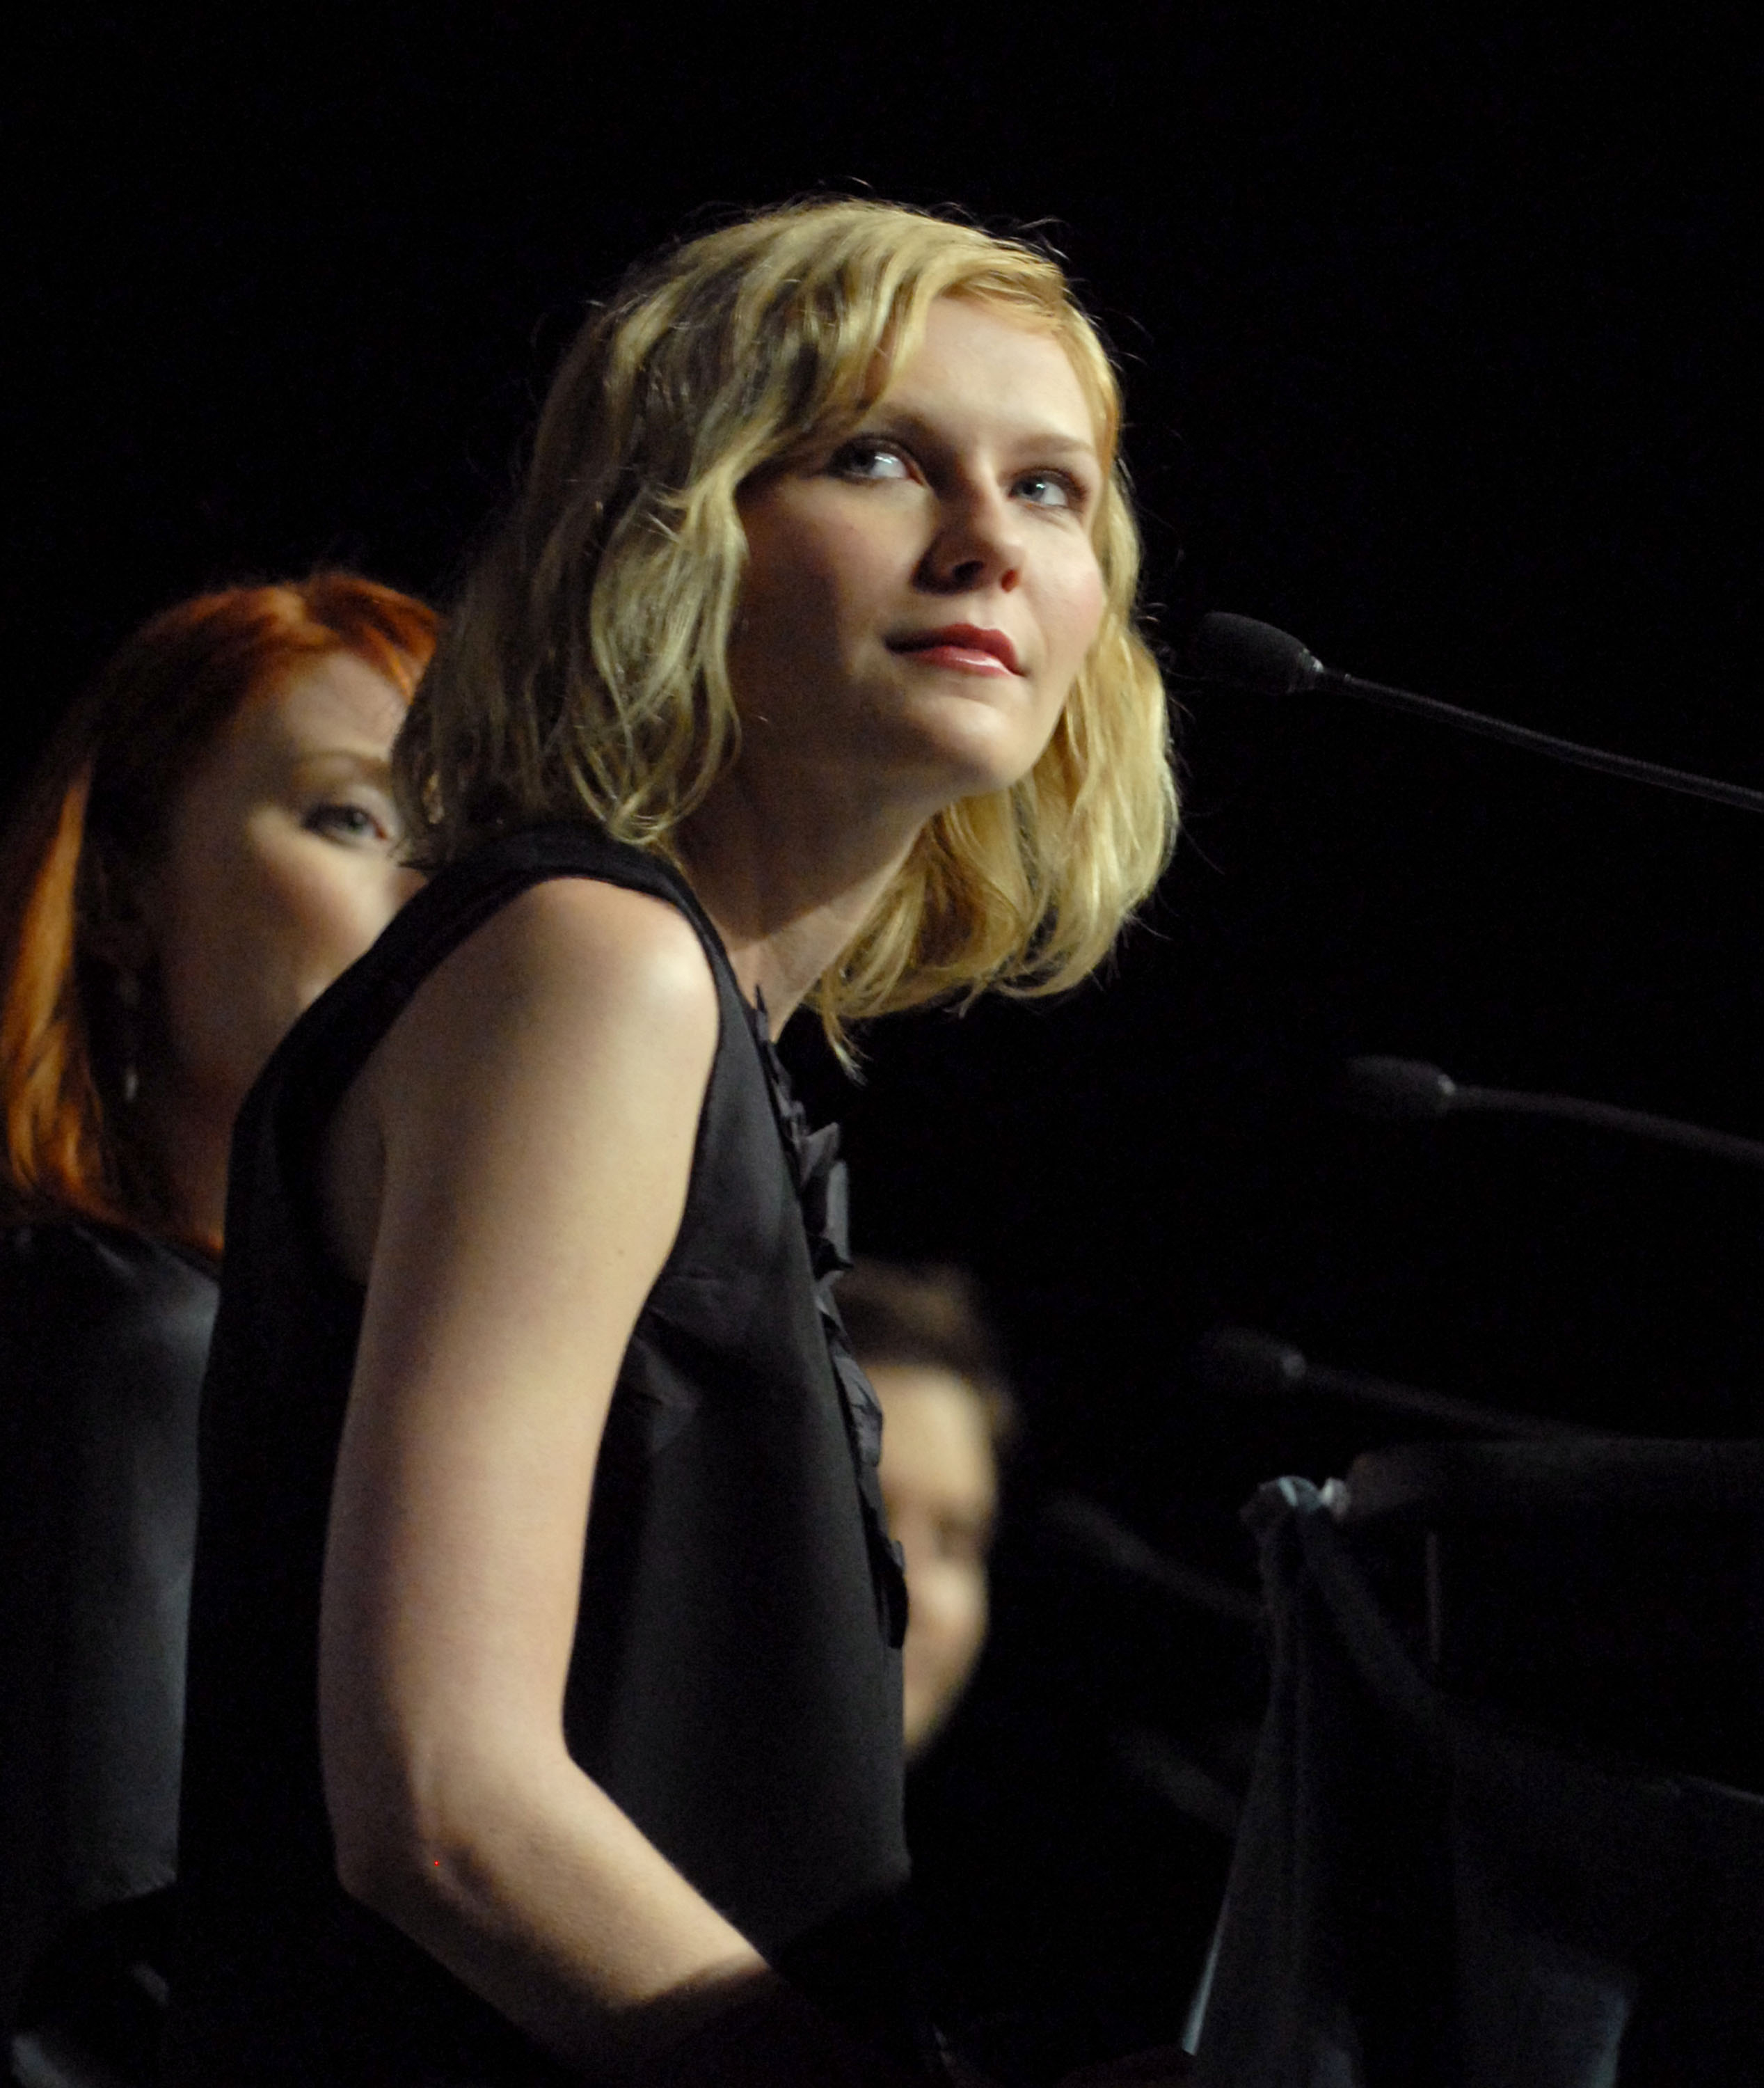 Kirsten Dunst in a sleeveless top speaks at a podium